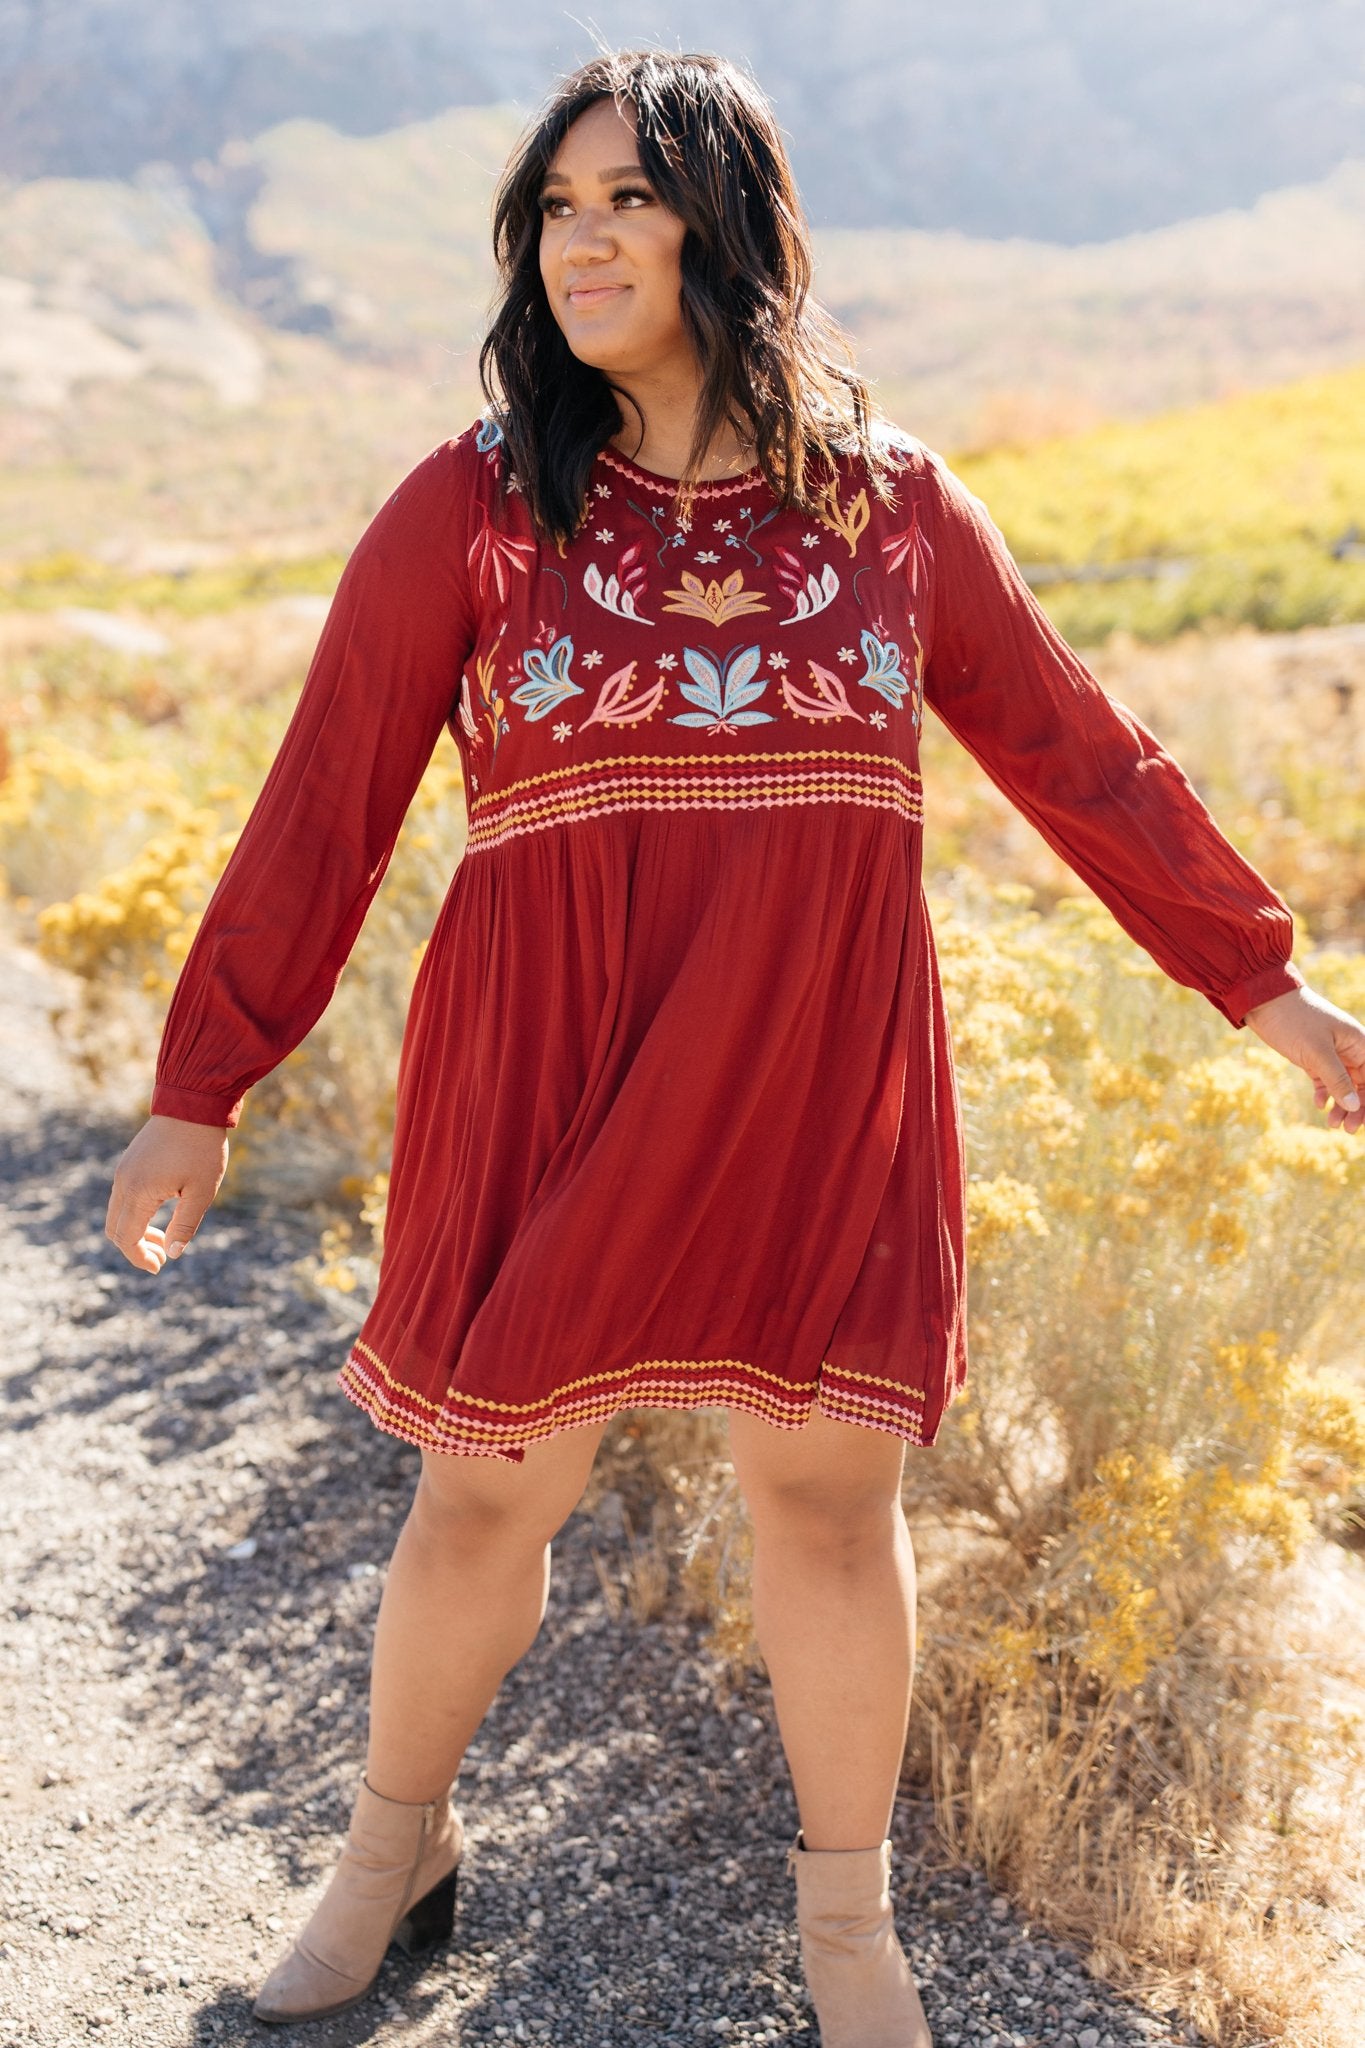 The Fall Embroidery Dress